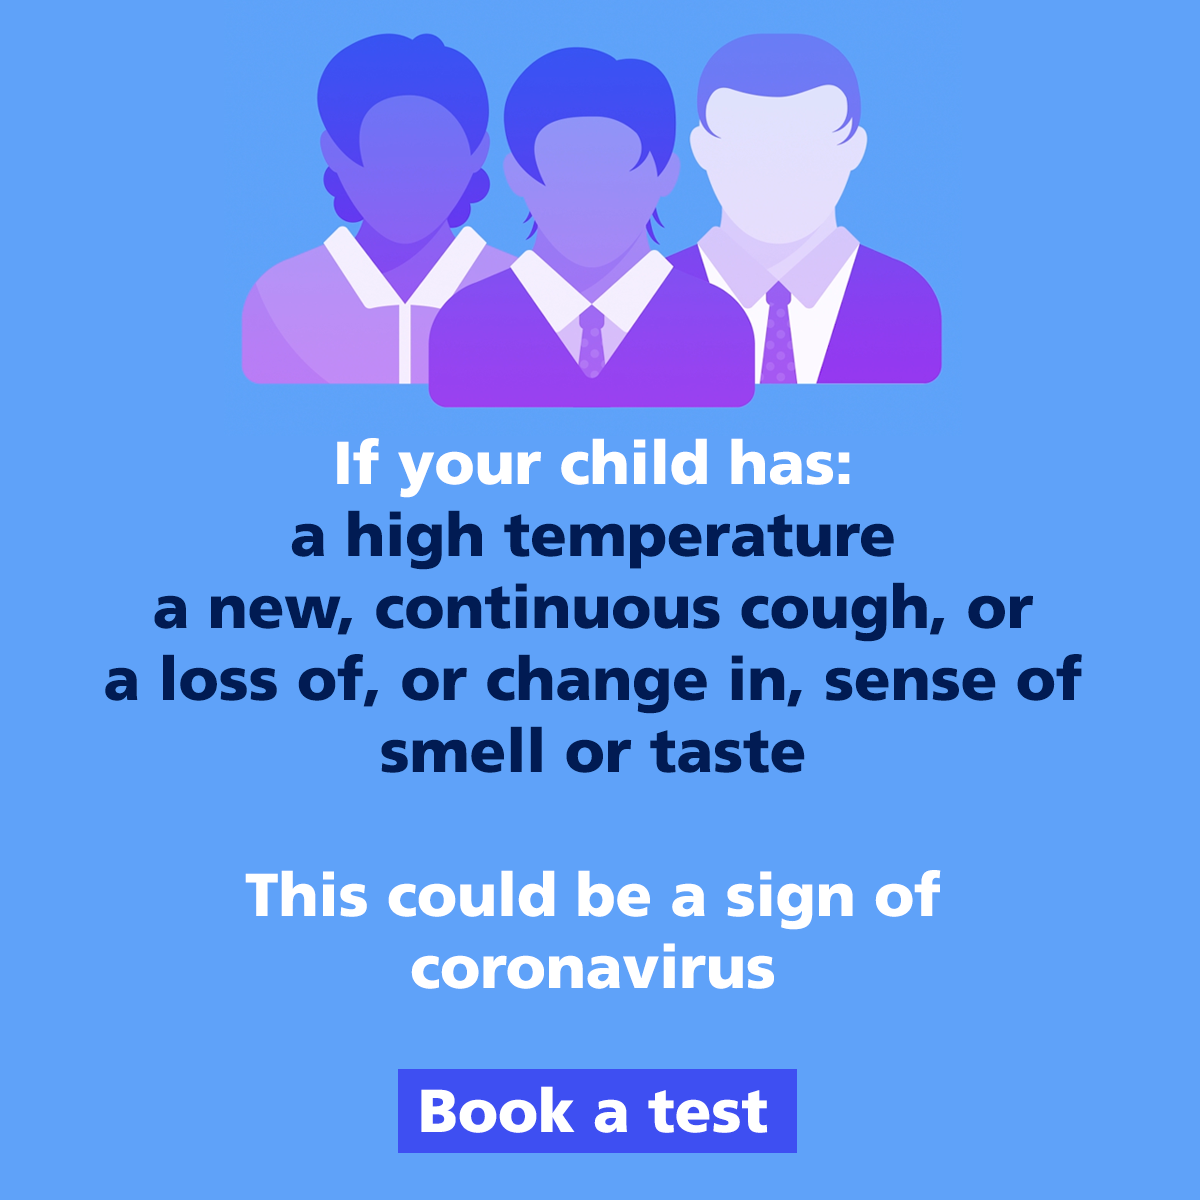 Public Health England - when to book a Covid test